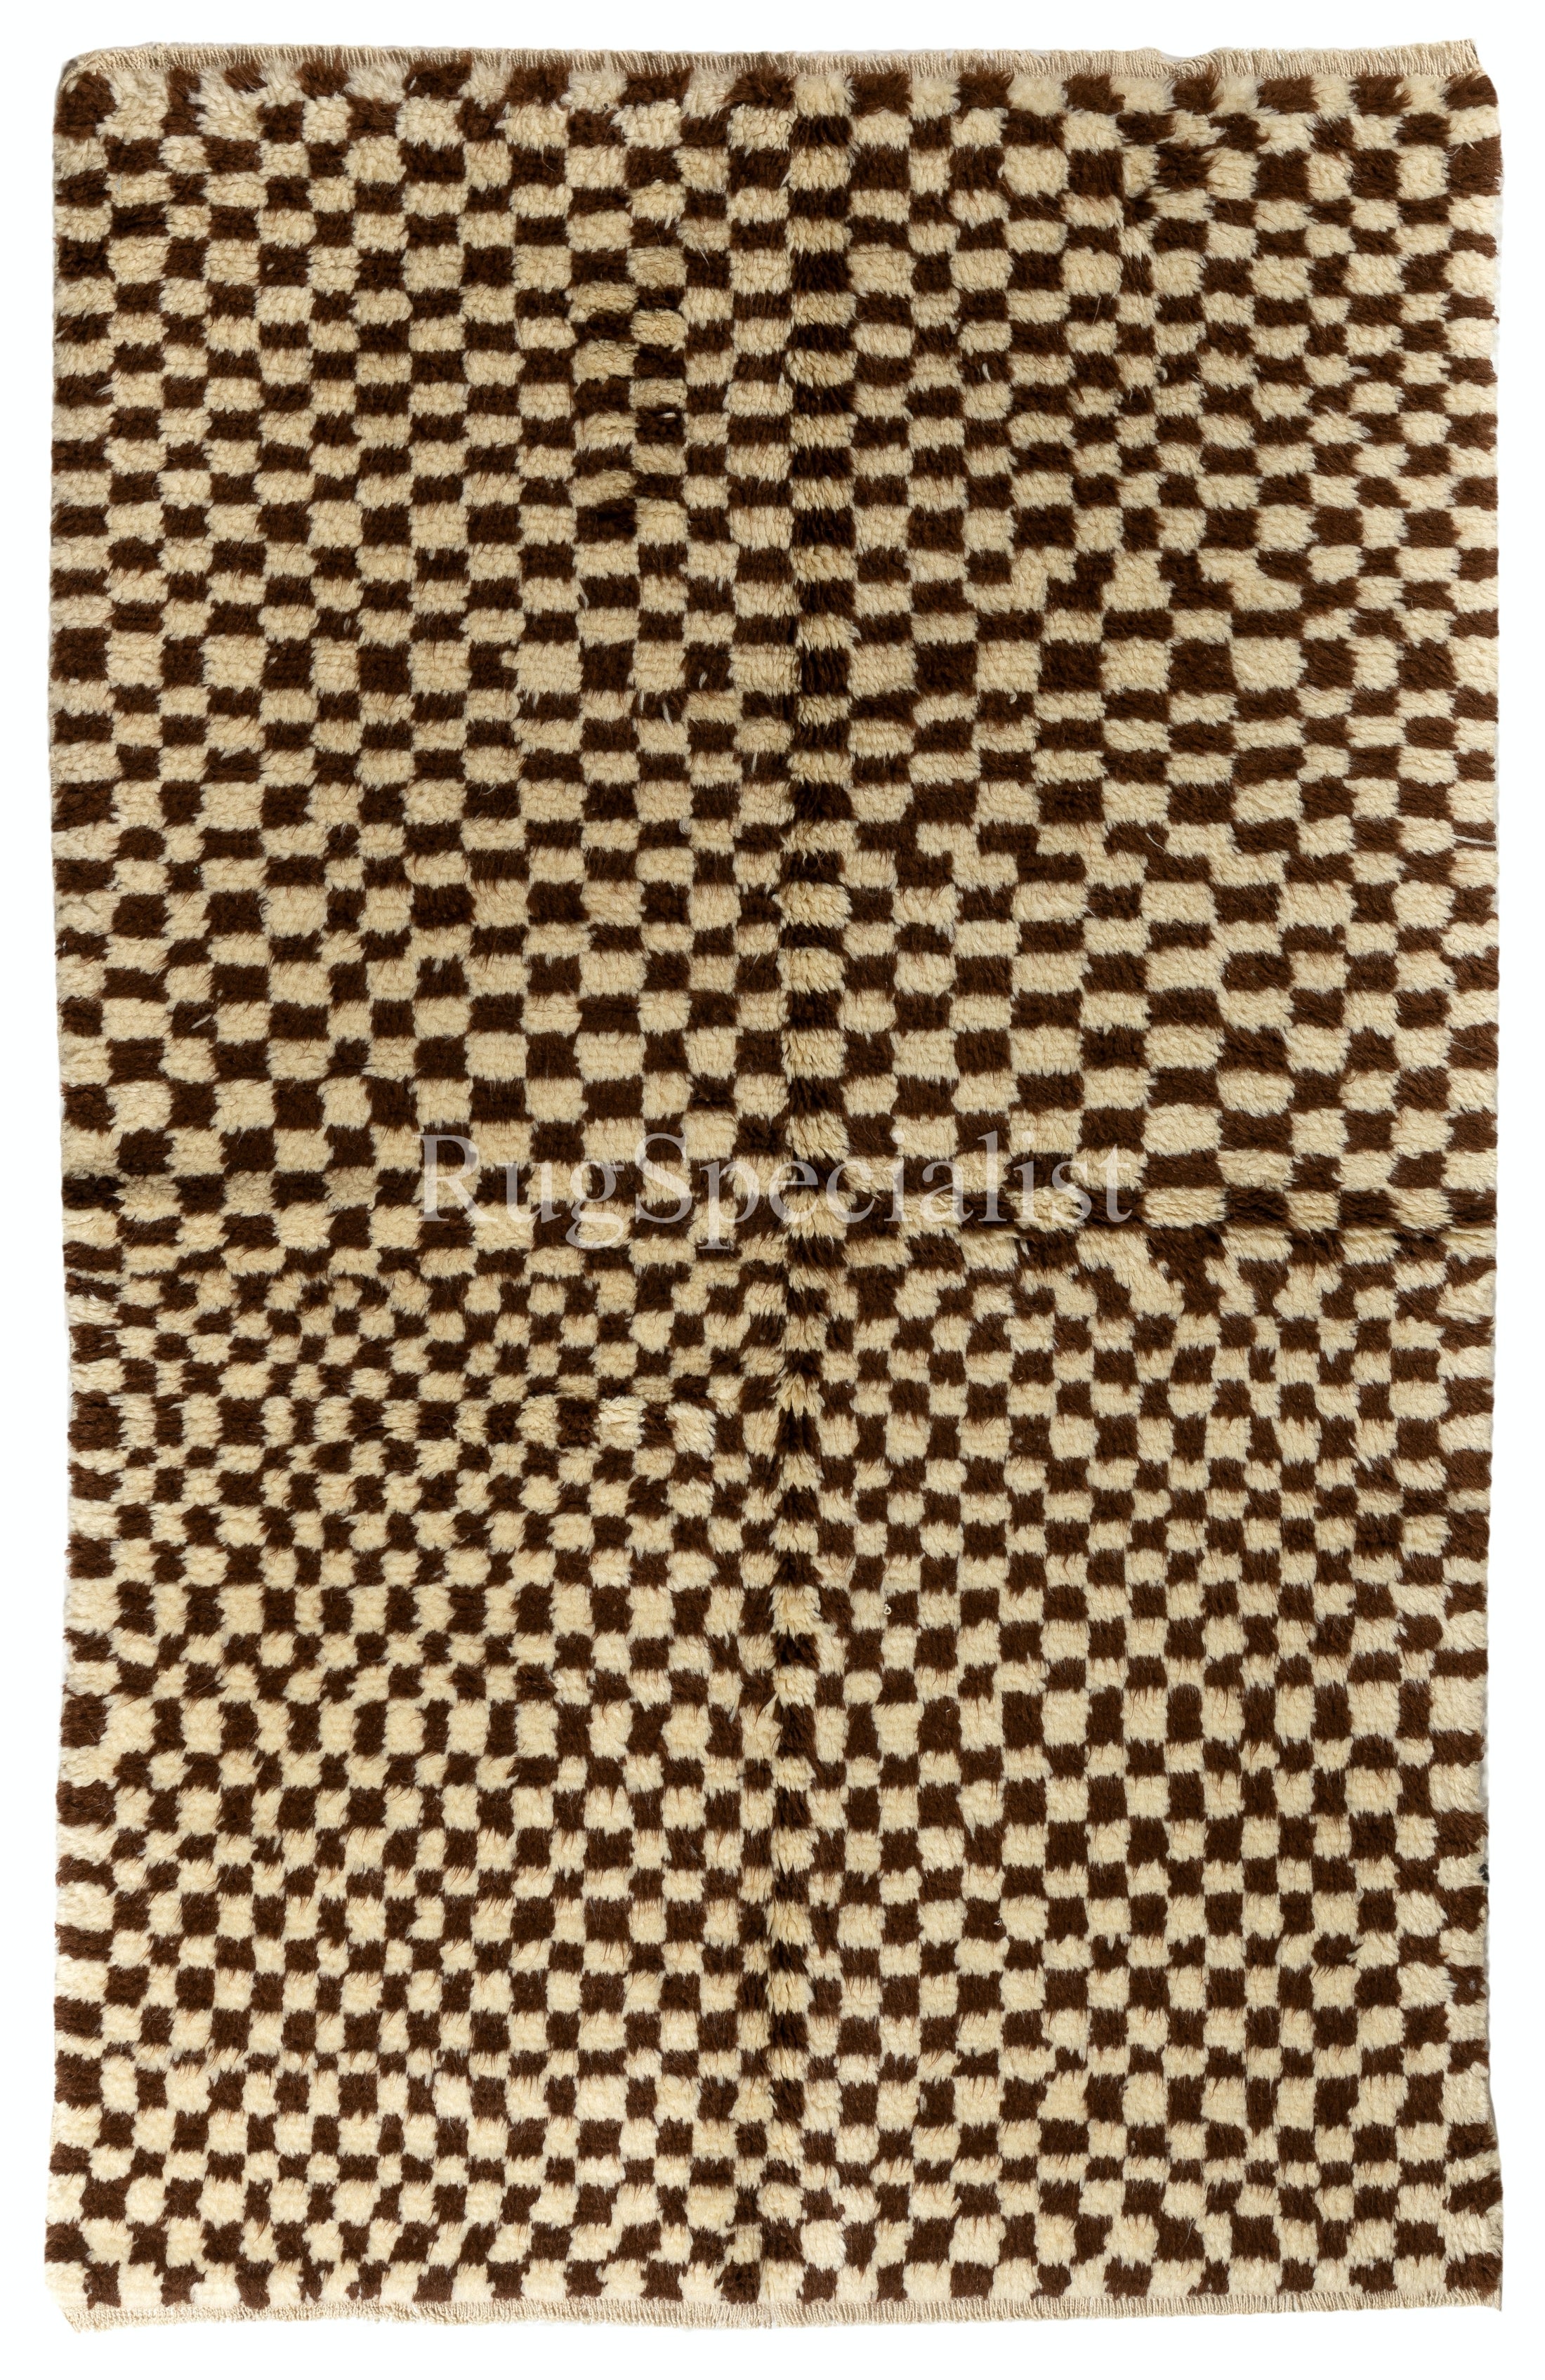  5x7 Ft Modern Checkered Hand-Knotted Tulu Rug, 100% Wool, Cream and Brown Color For Sale